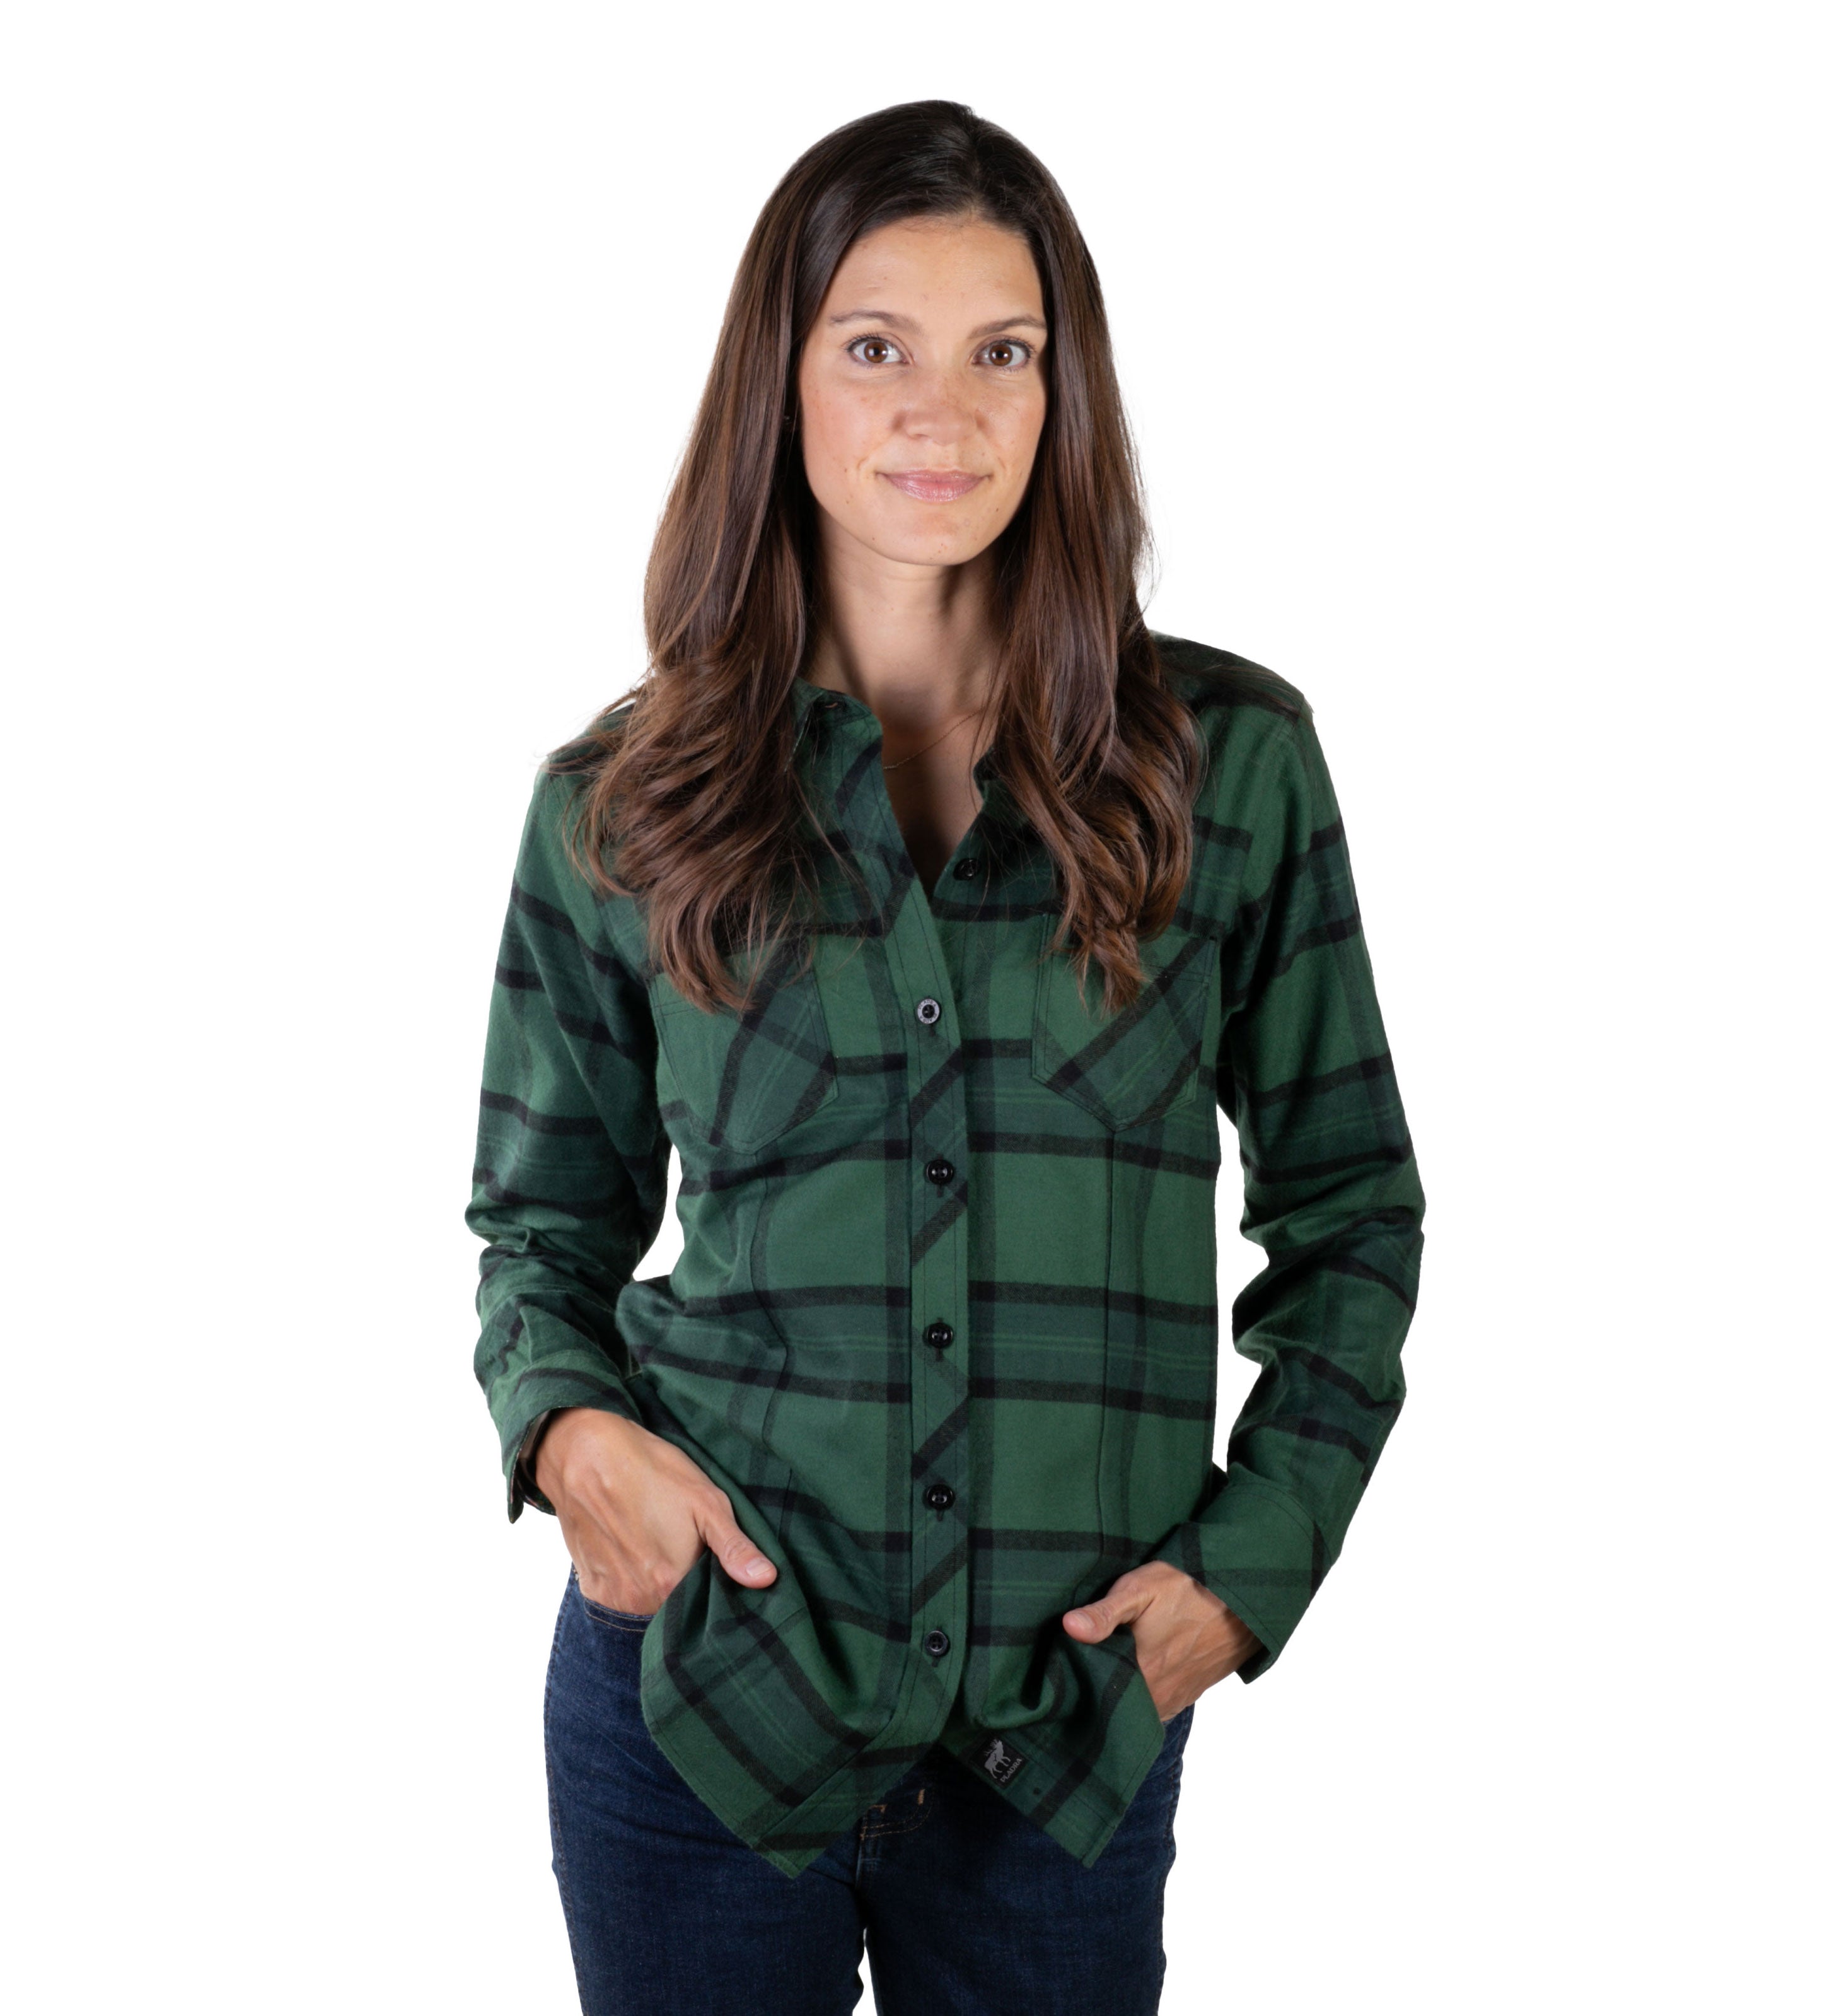 Toad and Co Women's Flannel Shirt - Plaiditude